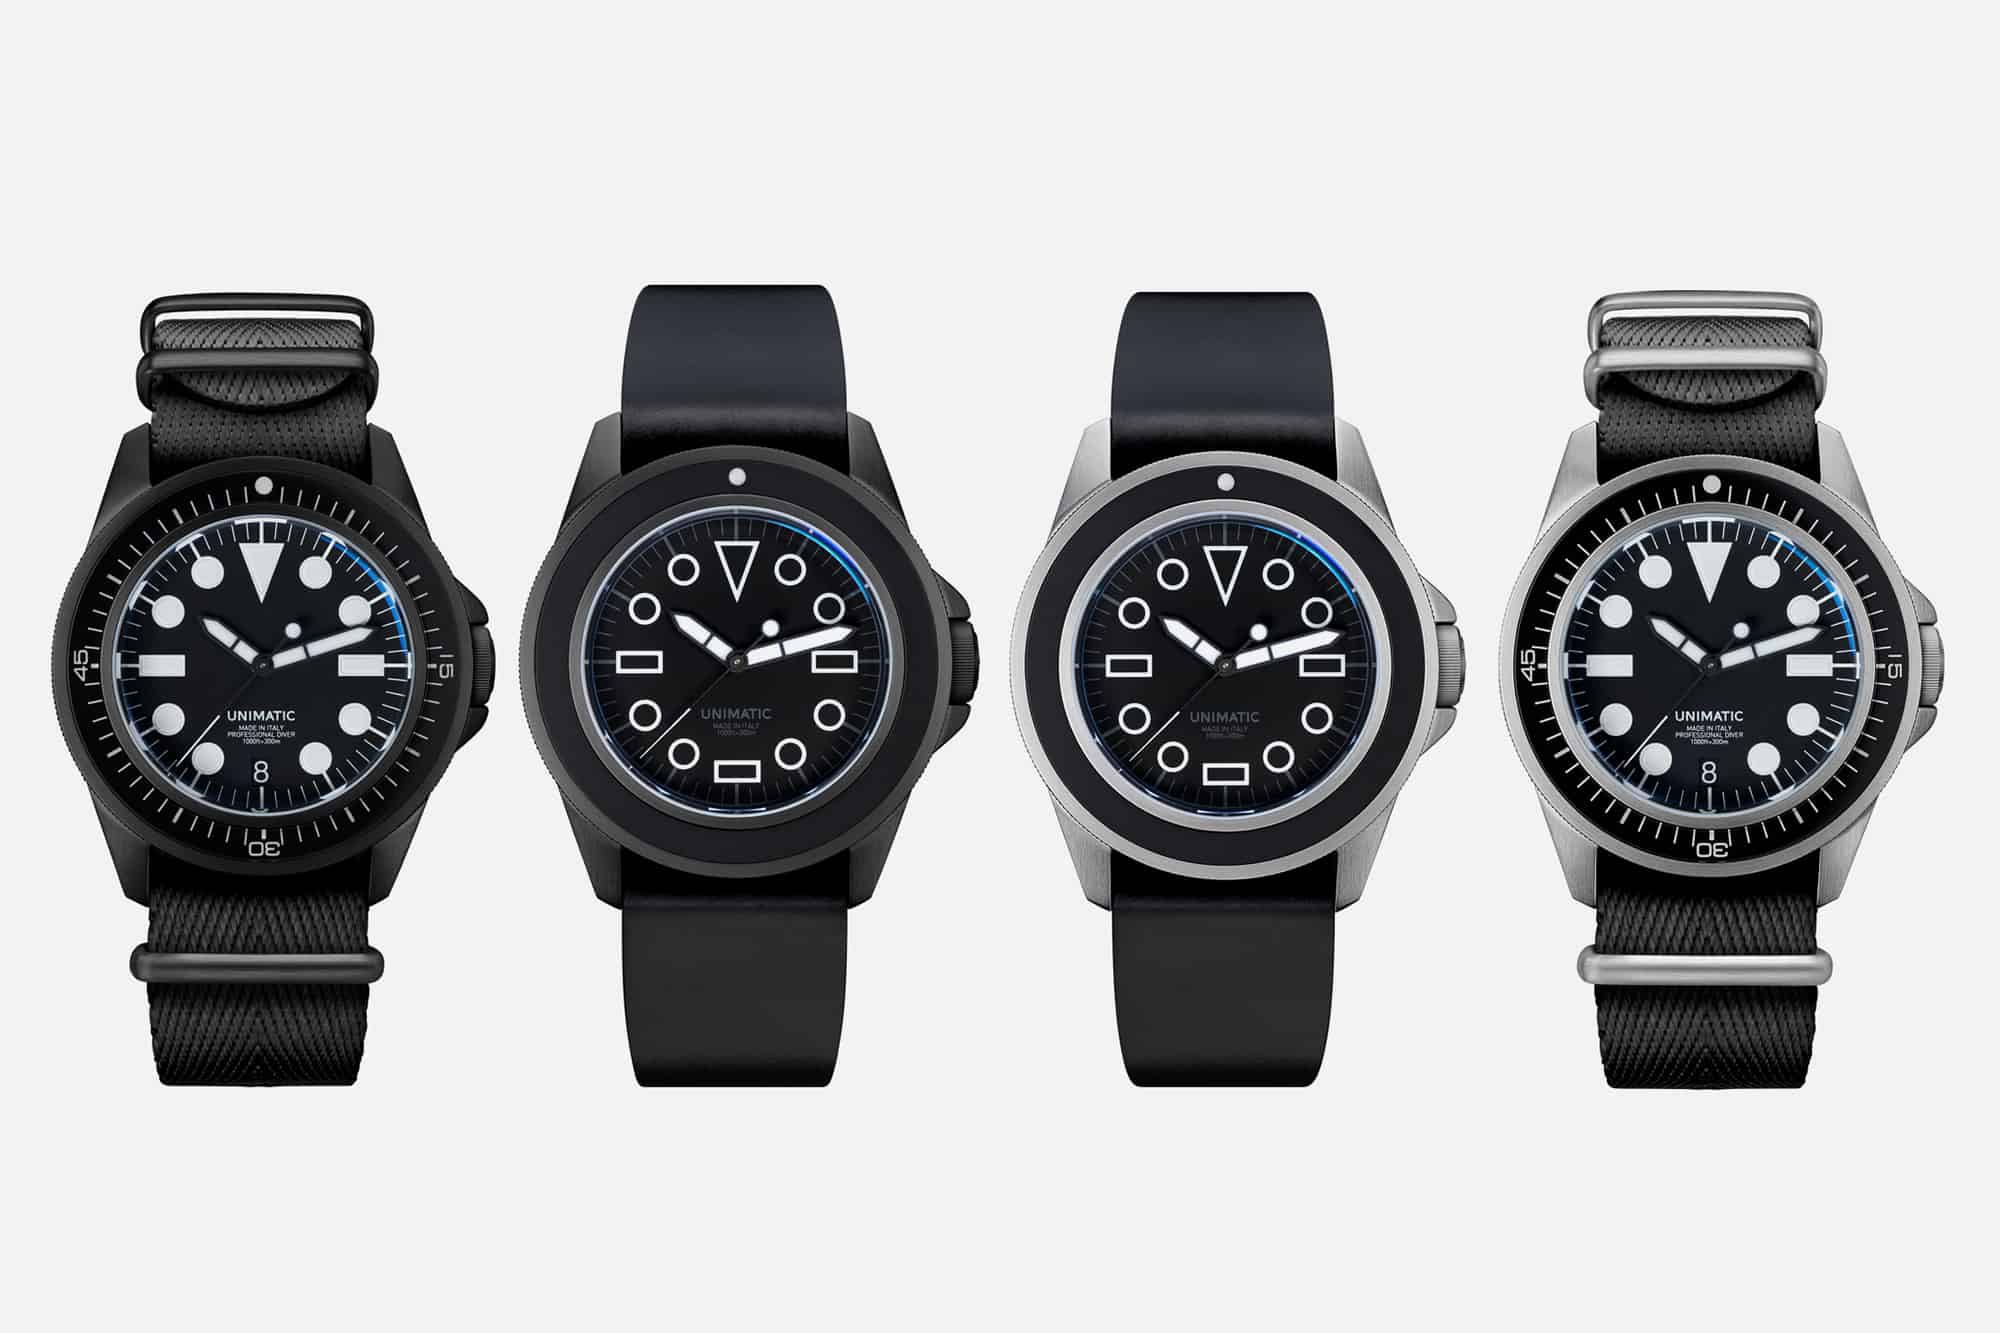 Introducing Four Limited Edition U1 Divers (and a New Bracelet) from Unimatic